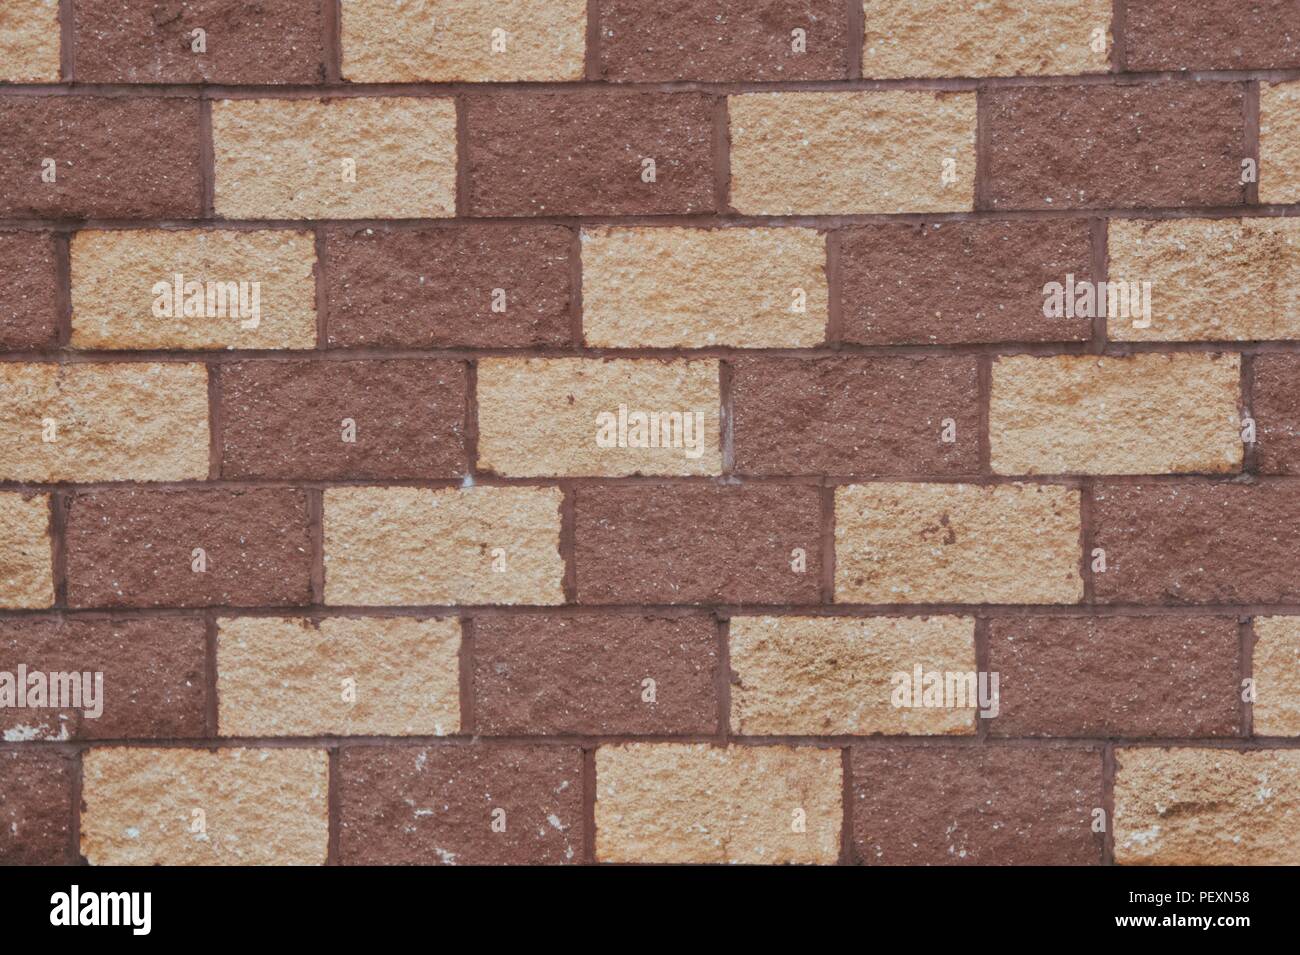 A pattern of brown and tan cement bricks on the facade of a building. Stock Photo